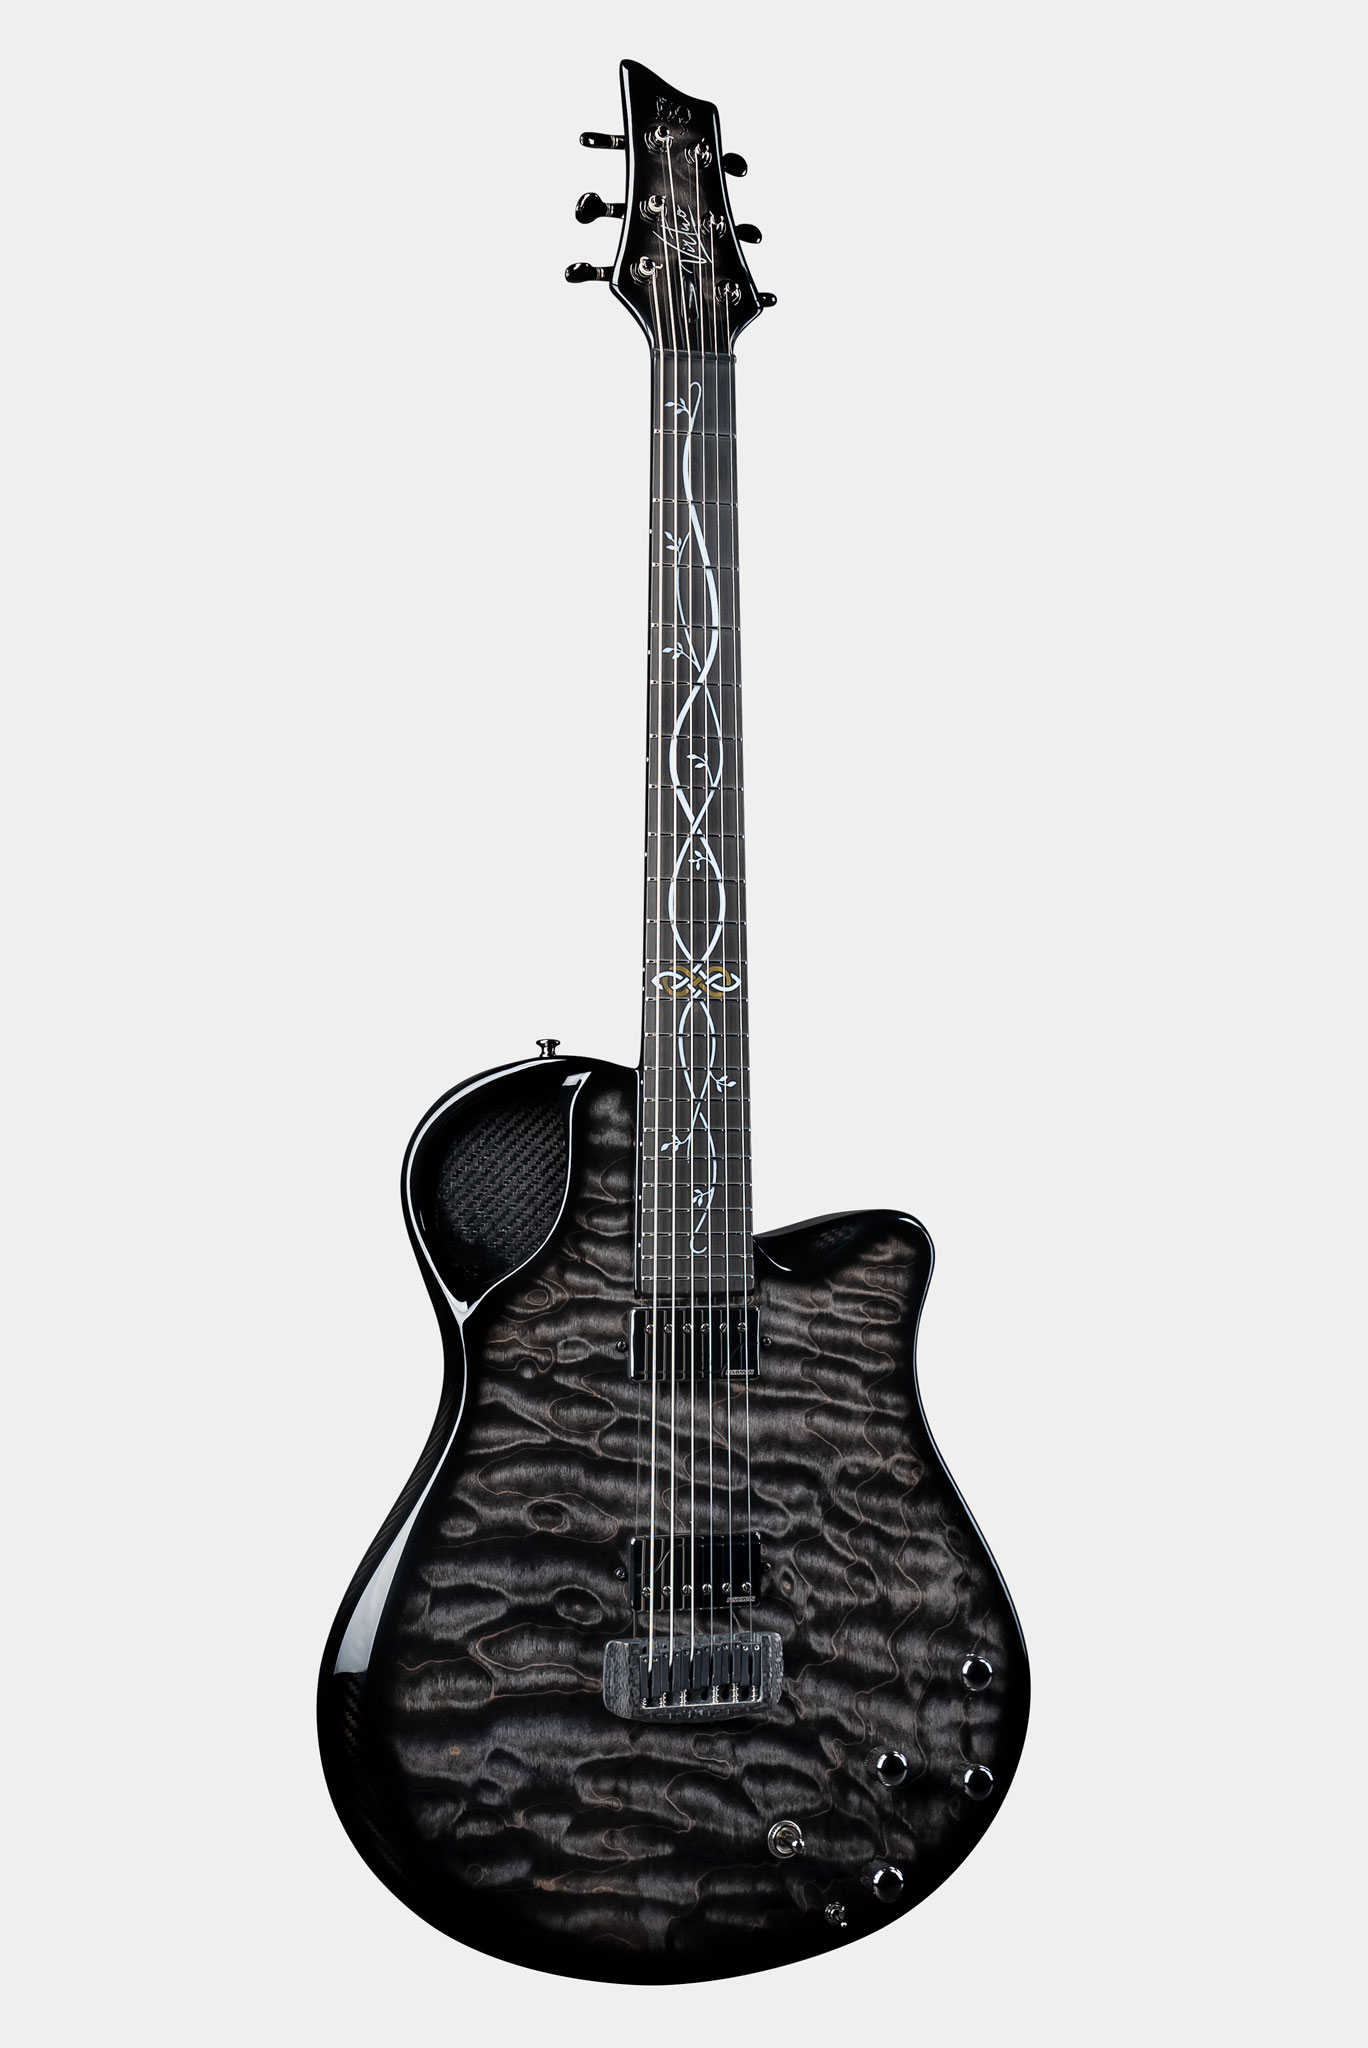 Emerald Virtuo Carbon Fiber Guitar in Quilted Maple Black with Leaves